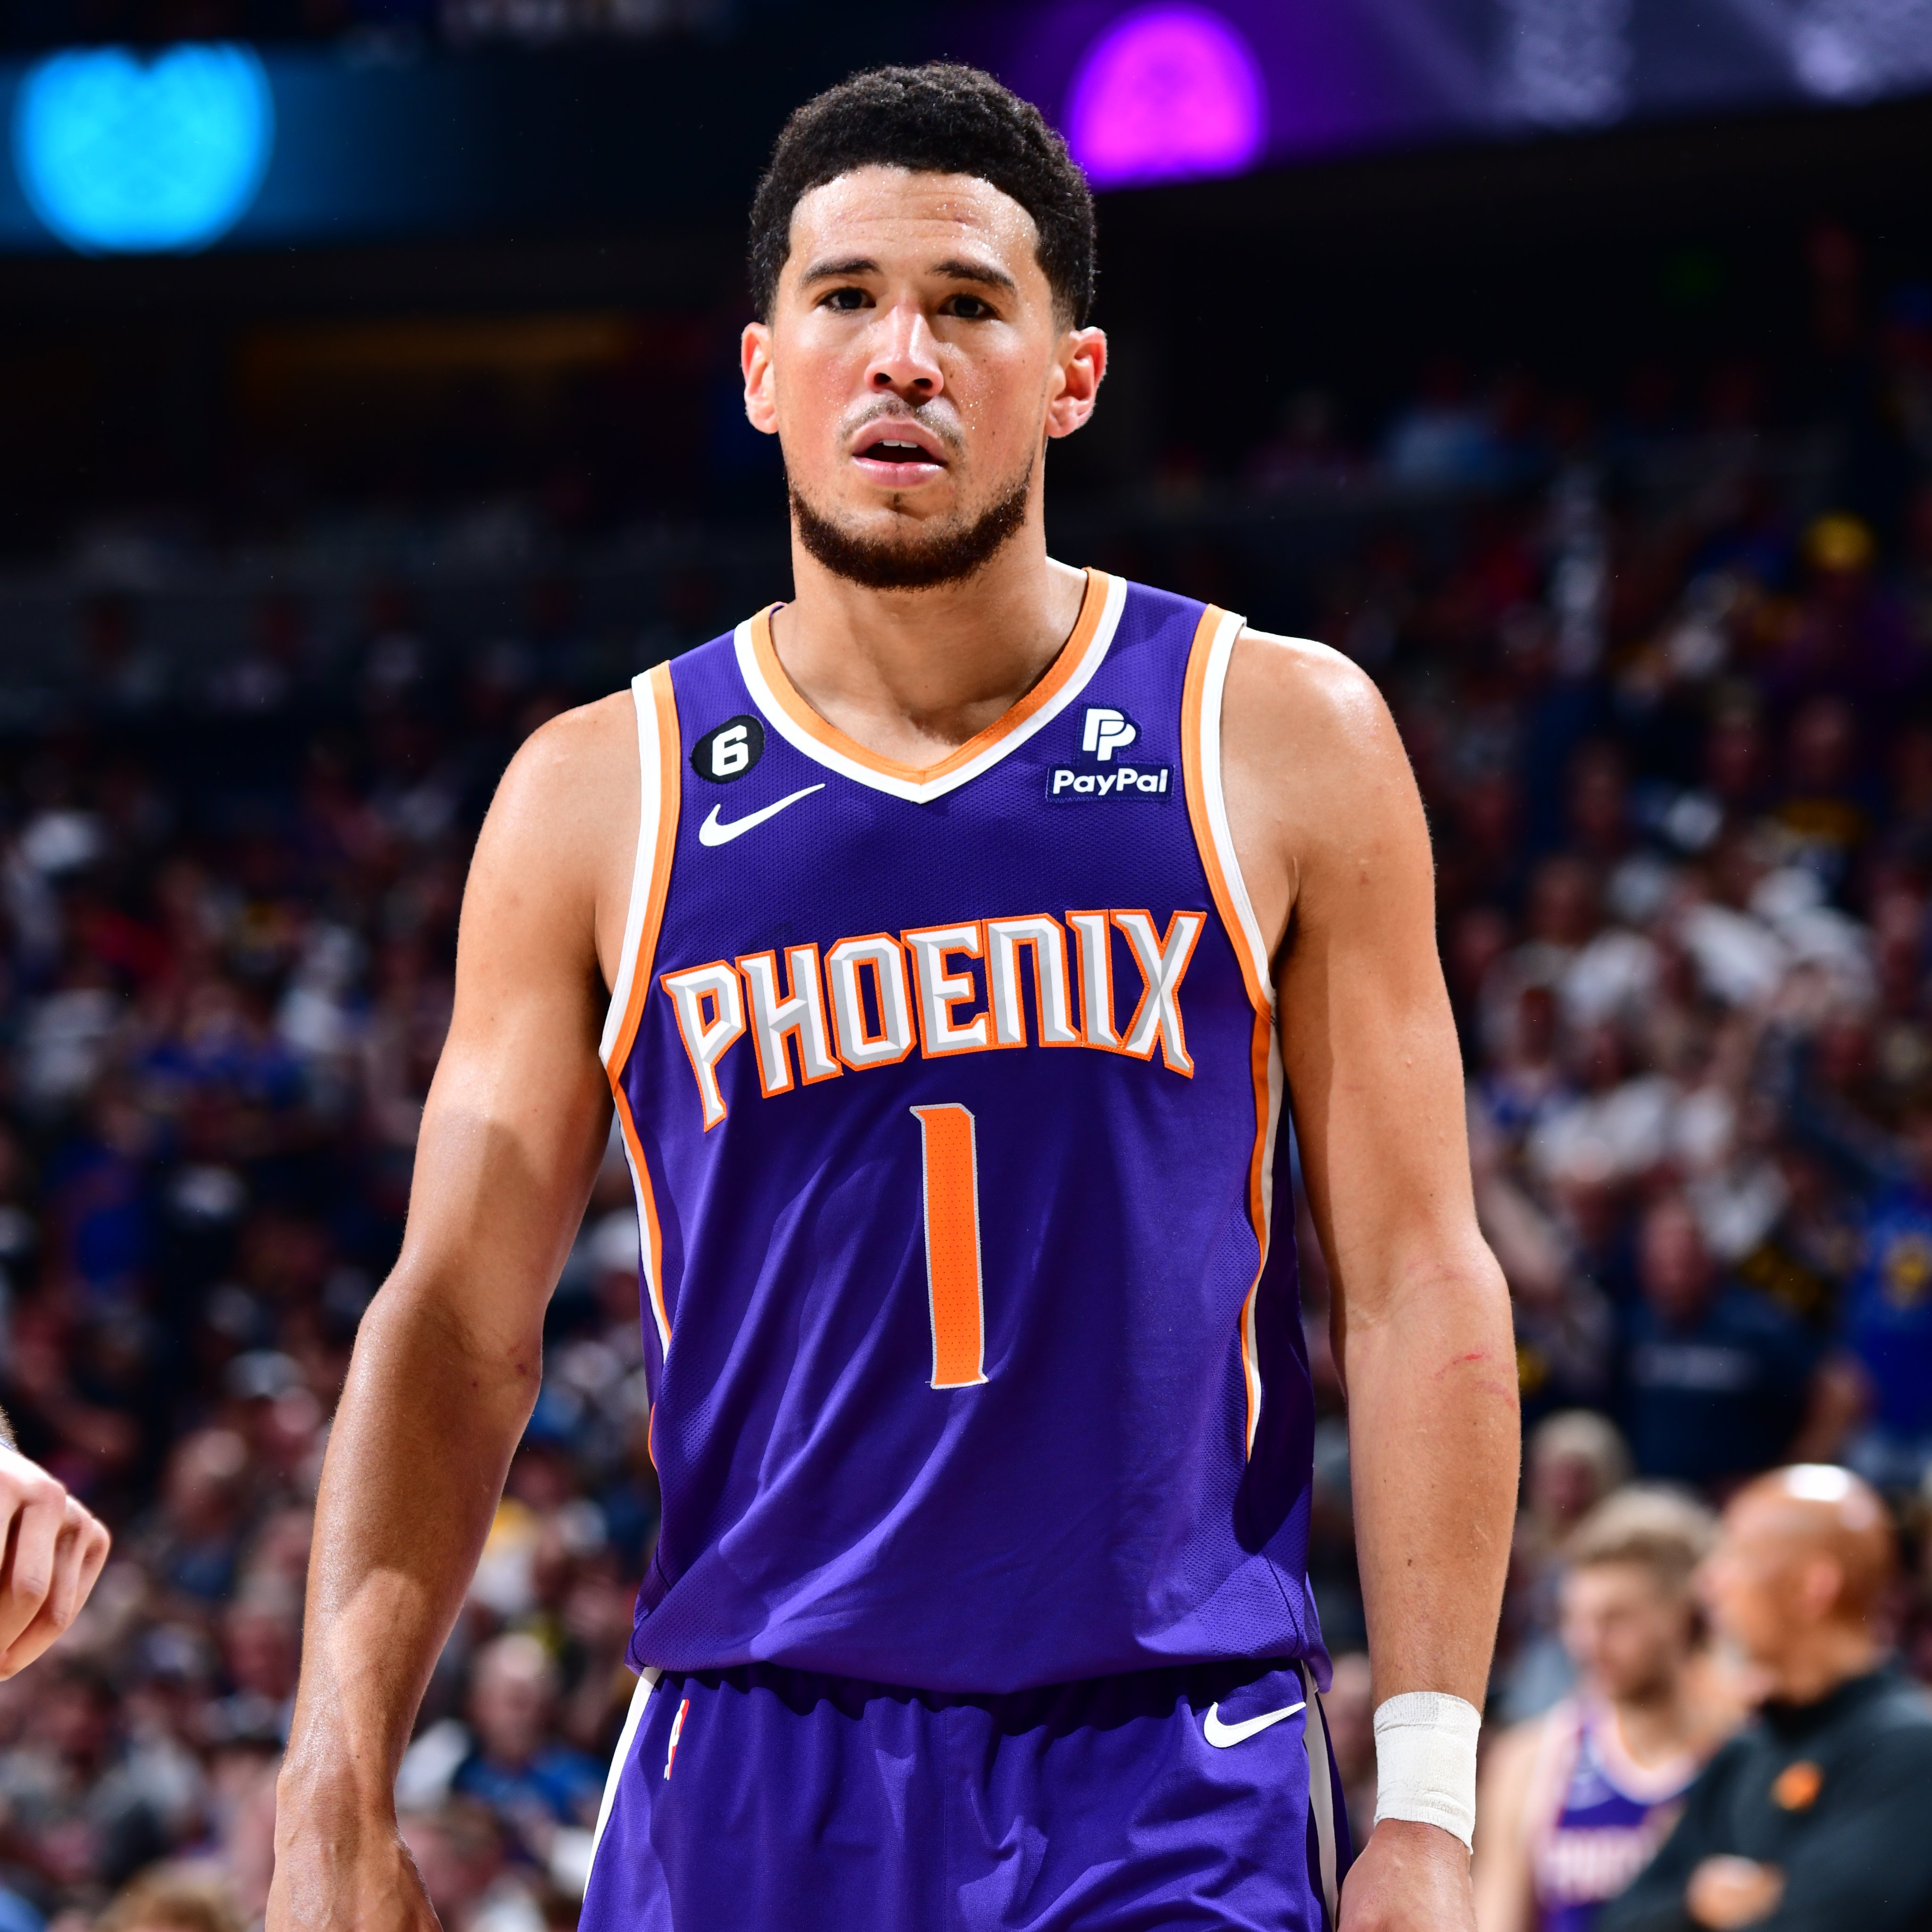 NBA History on X: Devin Booker is now T-8th for points scored in